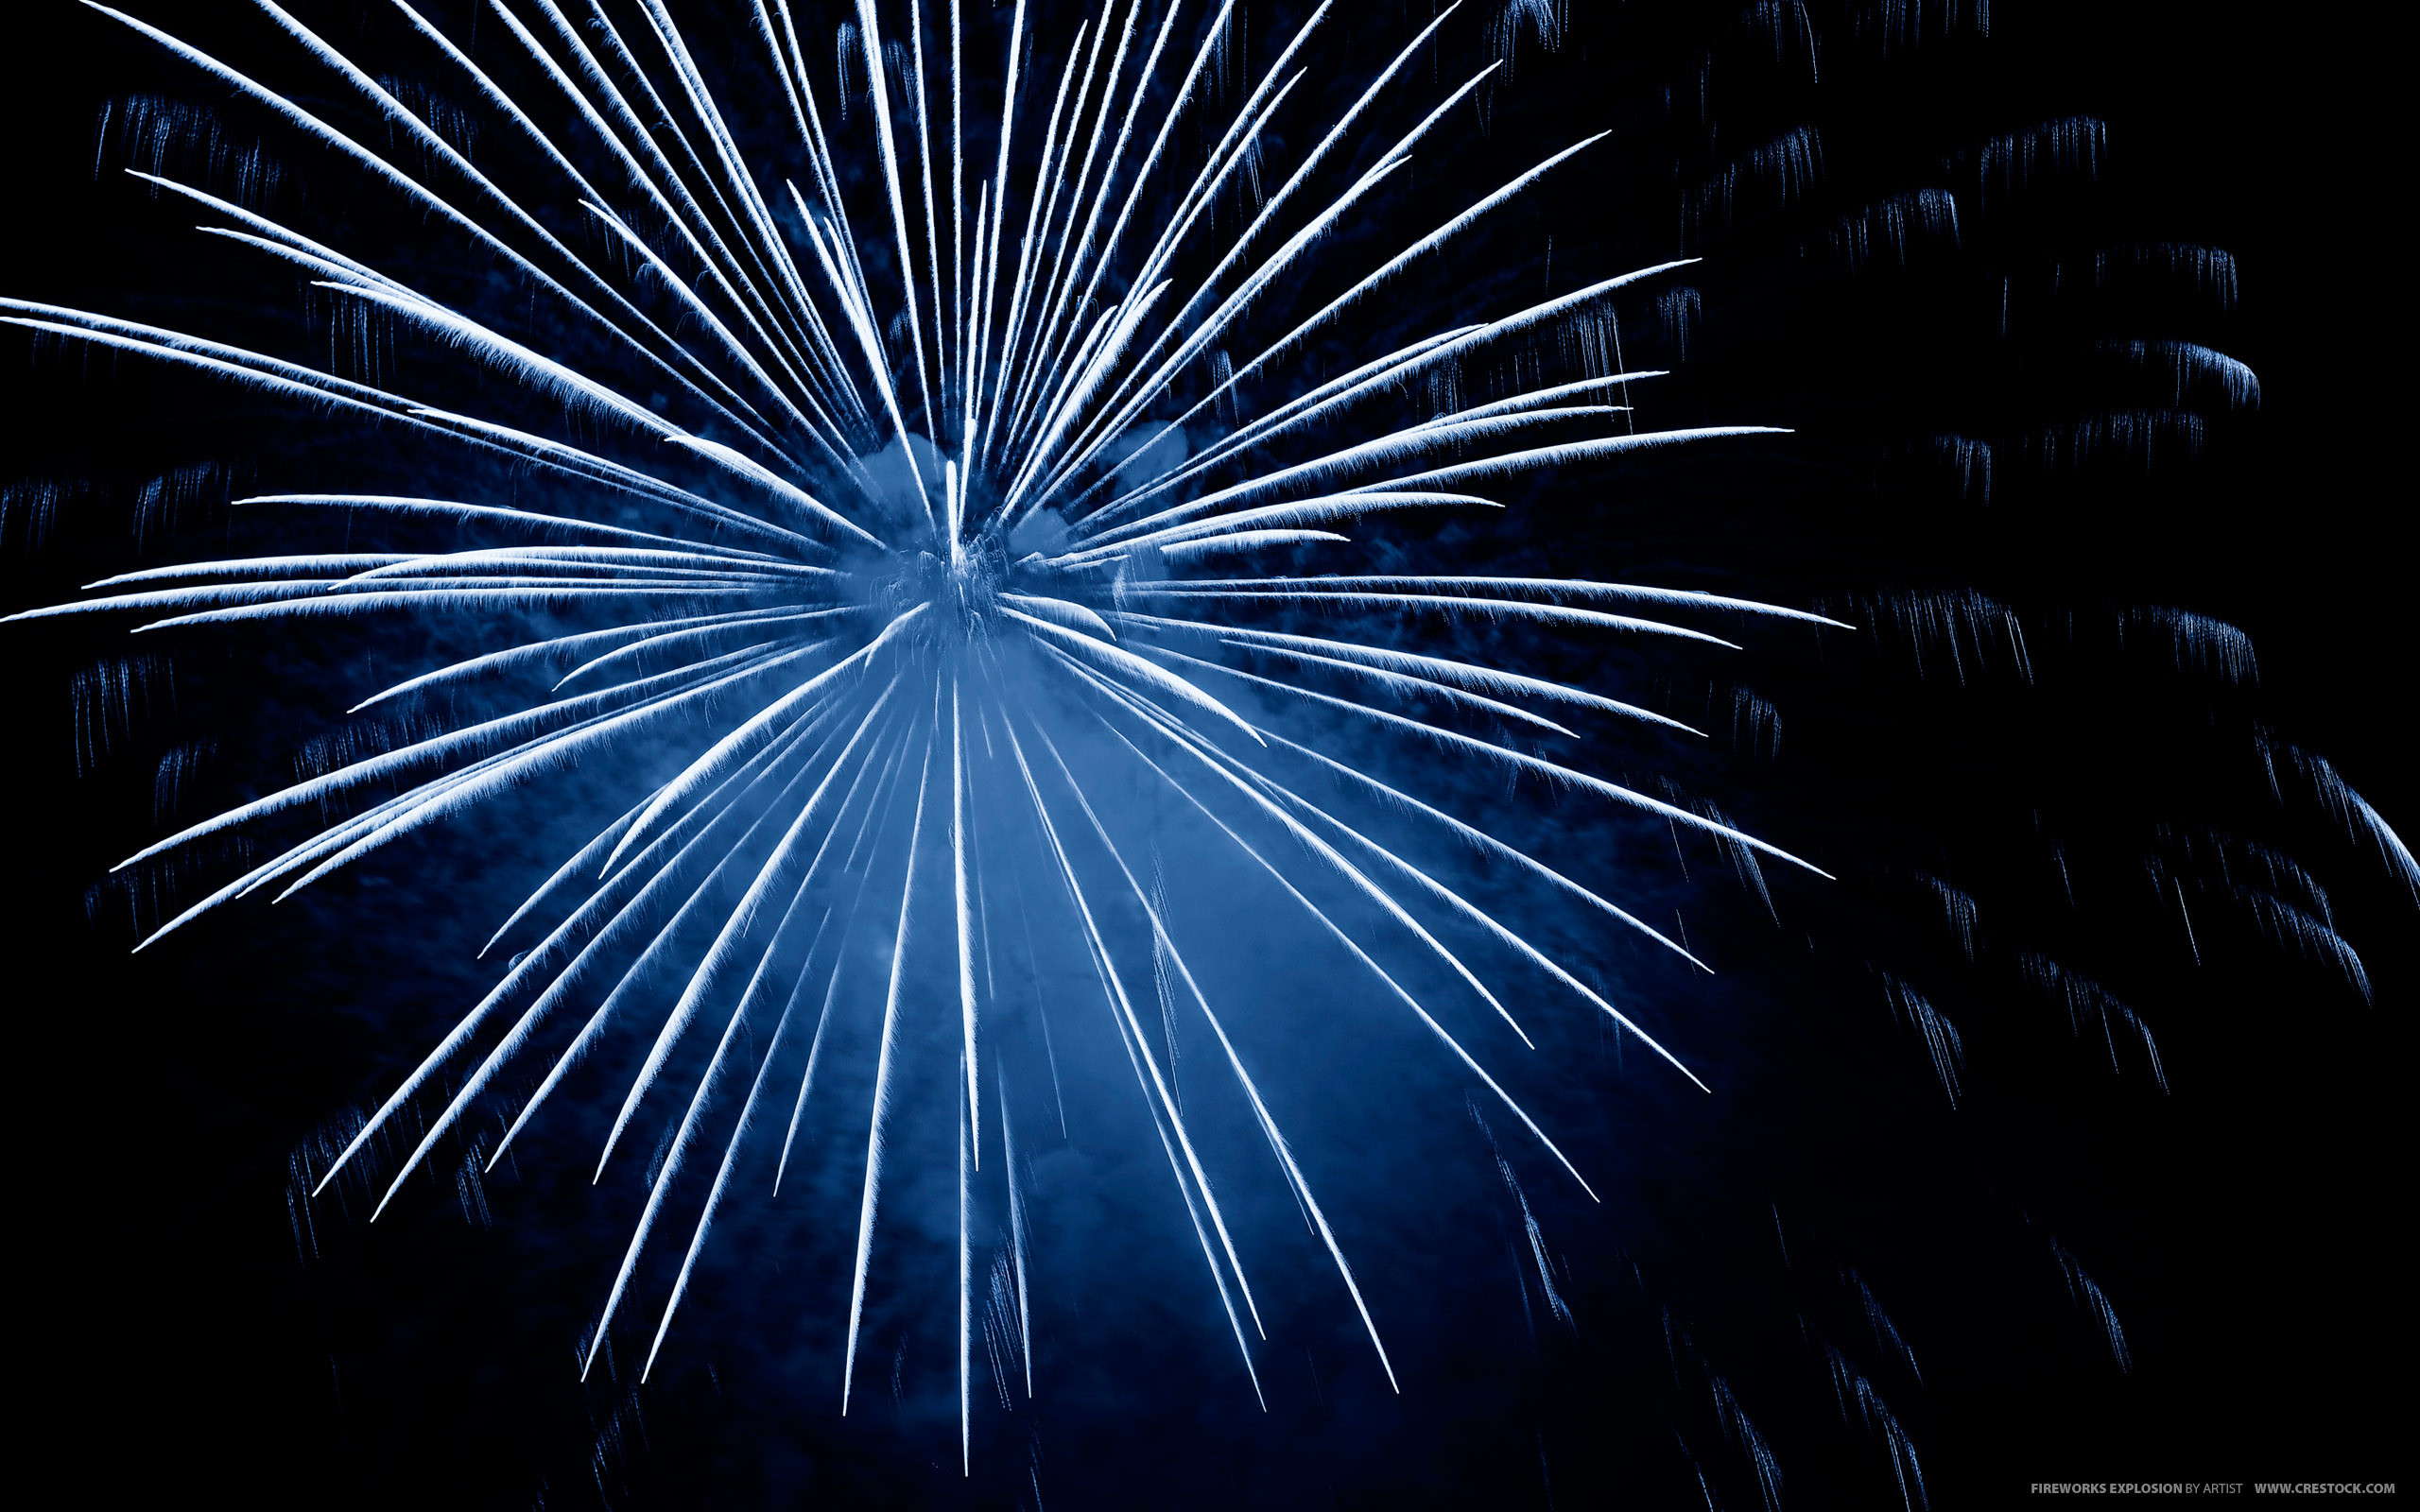 2560x1600 of Blue Fireworks Wallpapers, Free Explosion of Blue Fireworks .